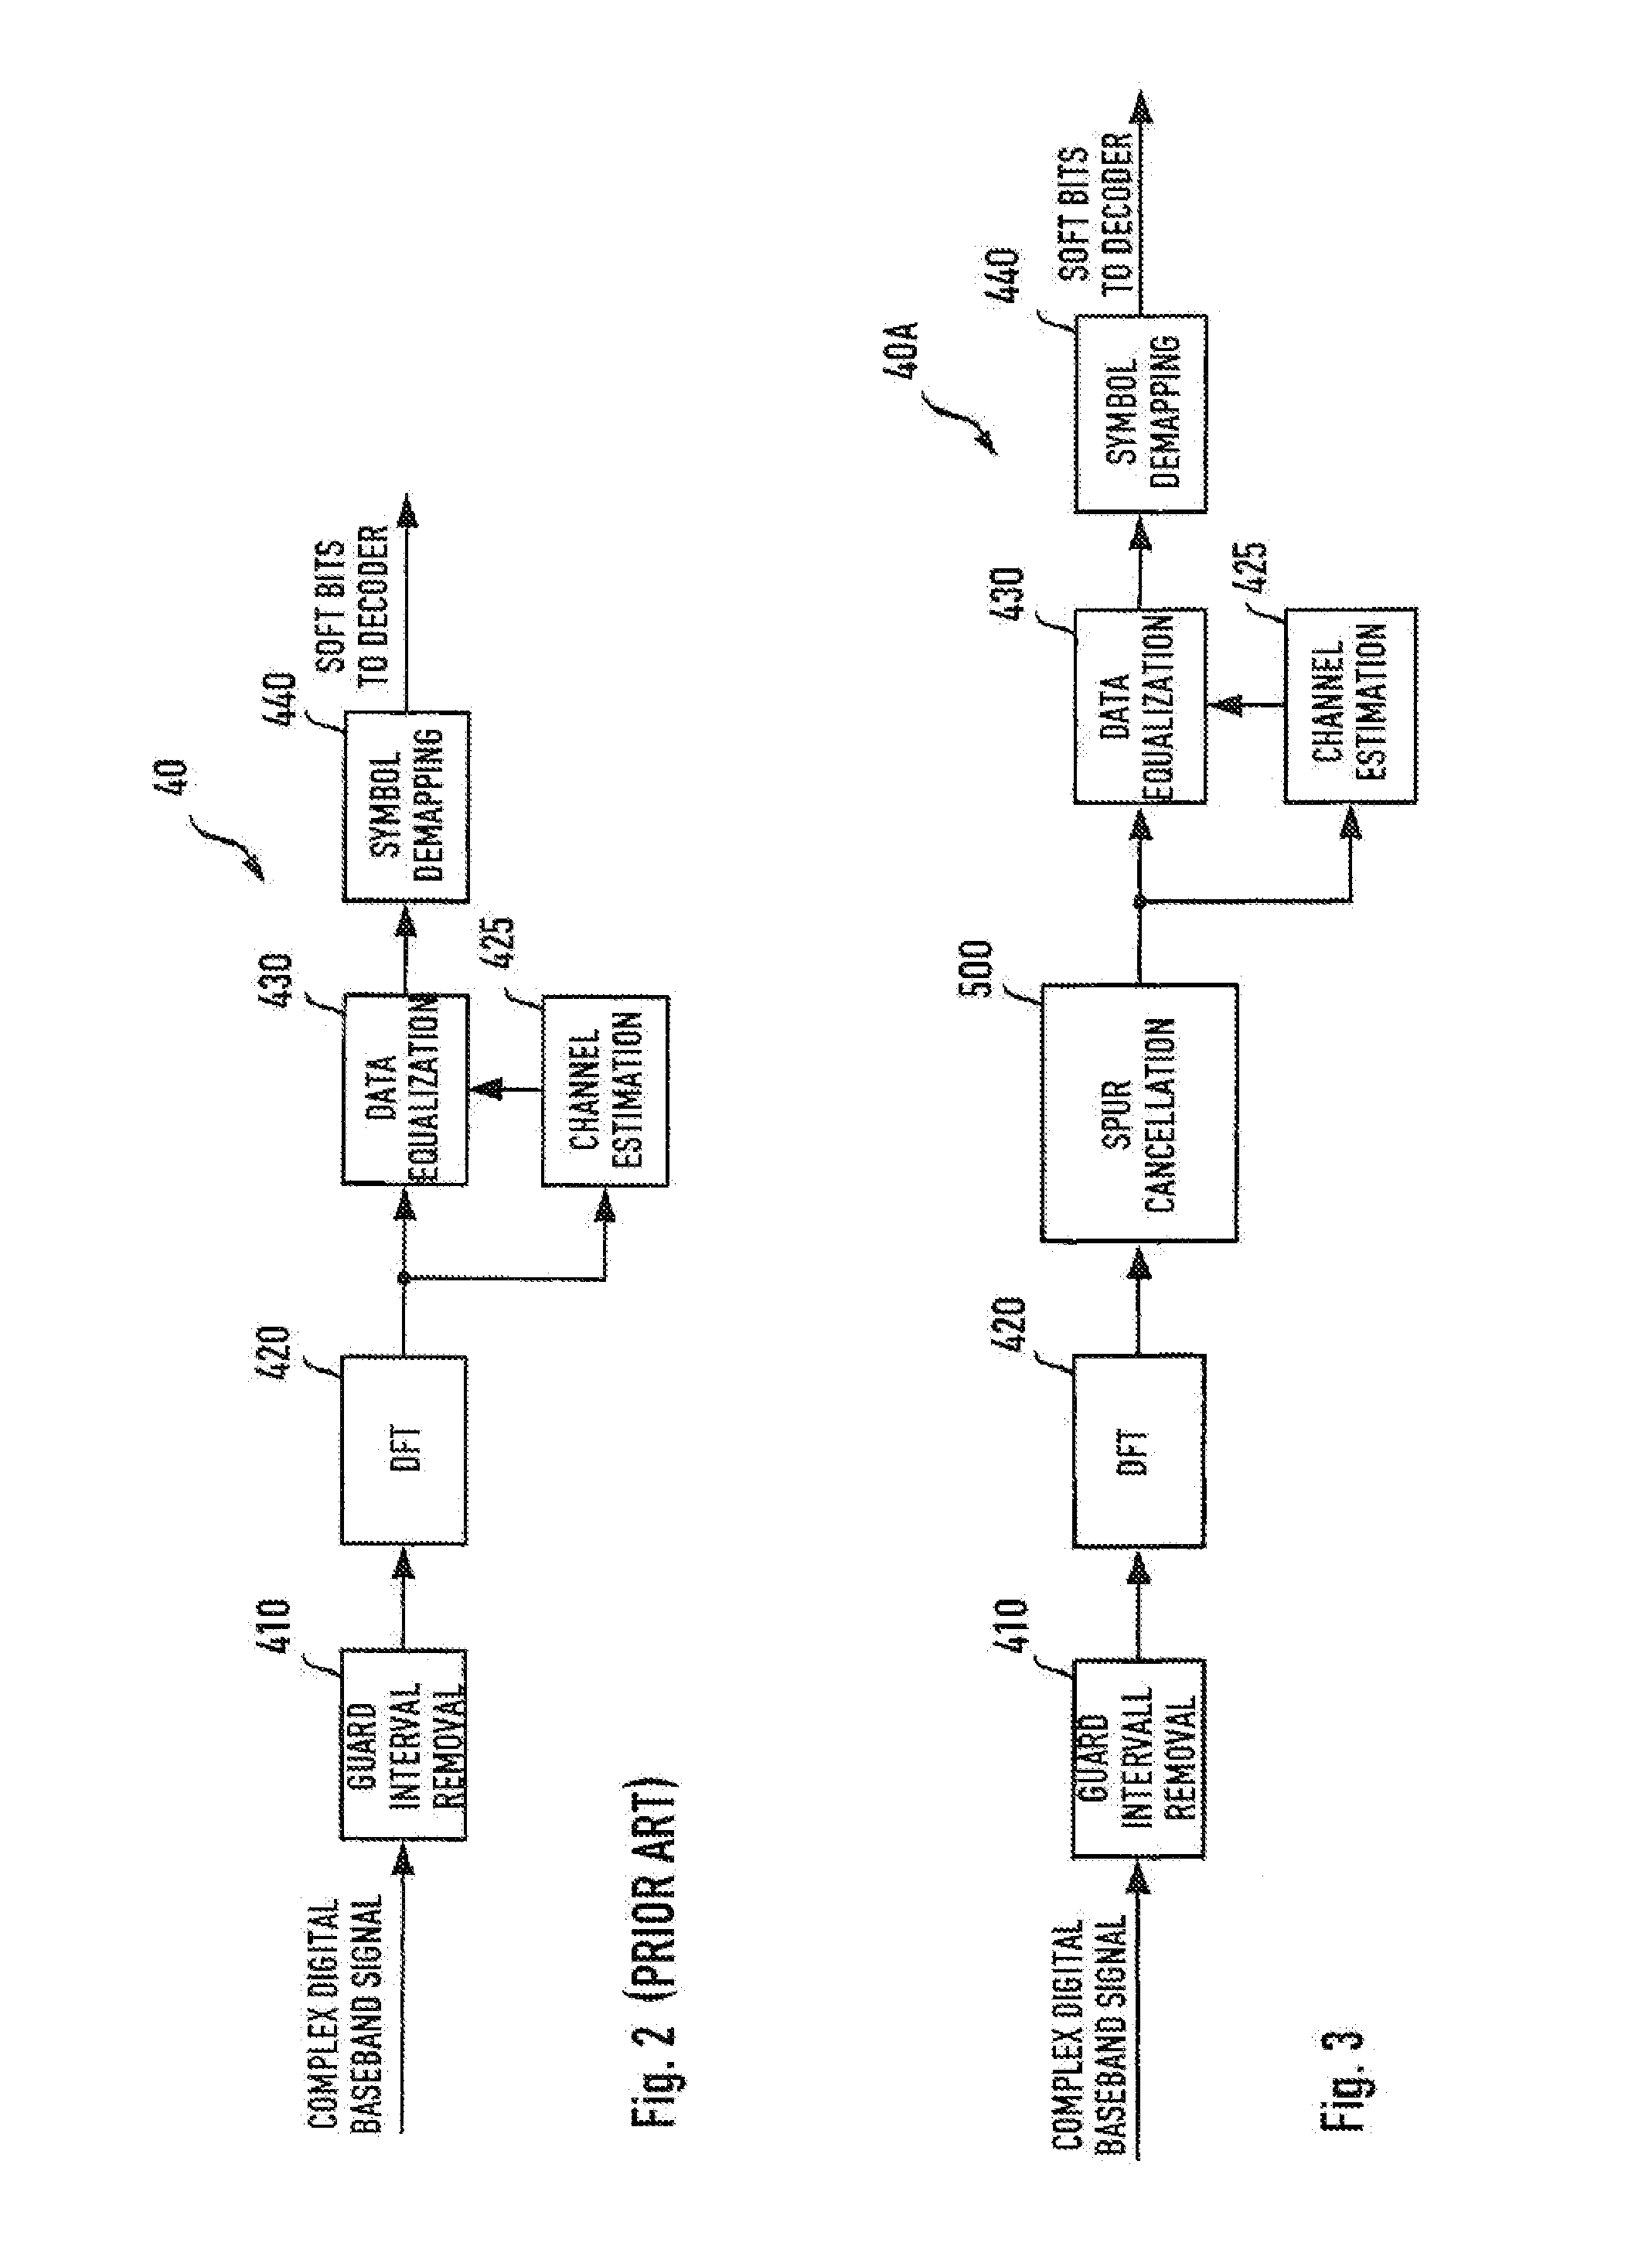 Method and apparatus to cancel additive sinusoidal disturbances in OFDM receivers